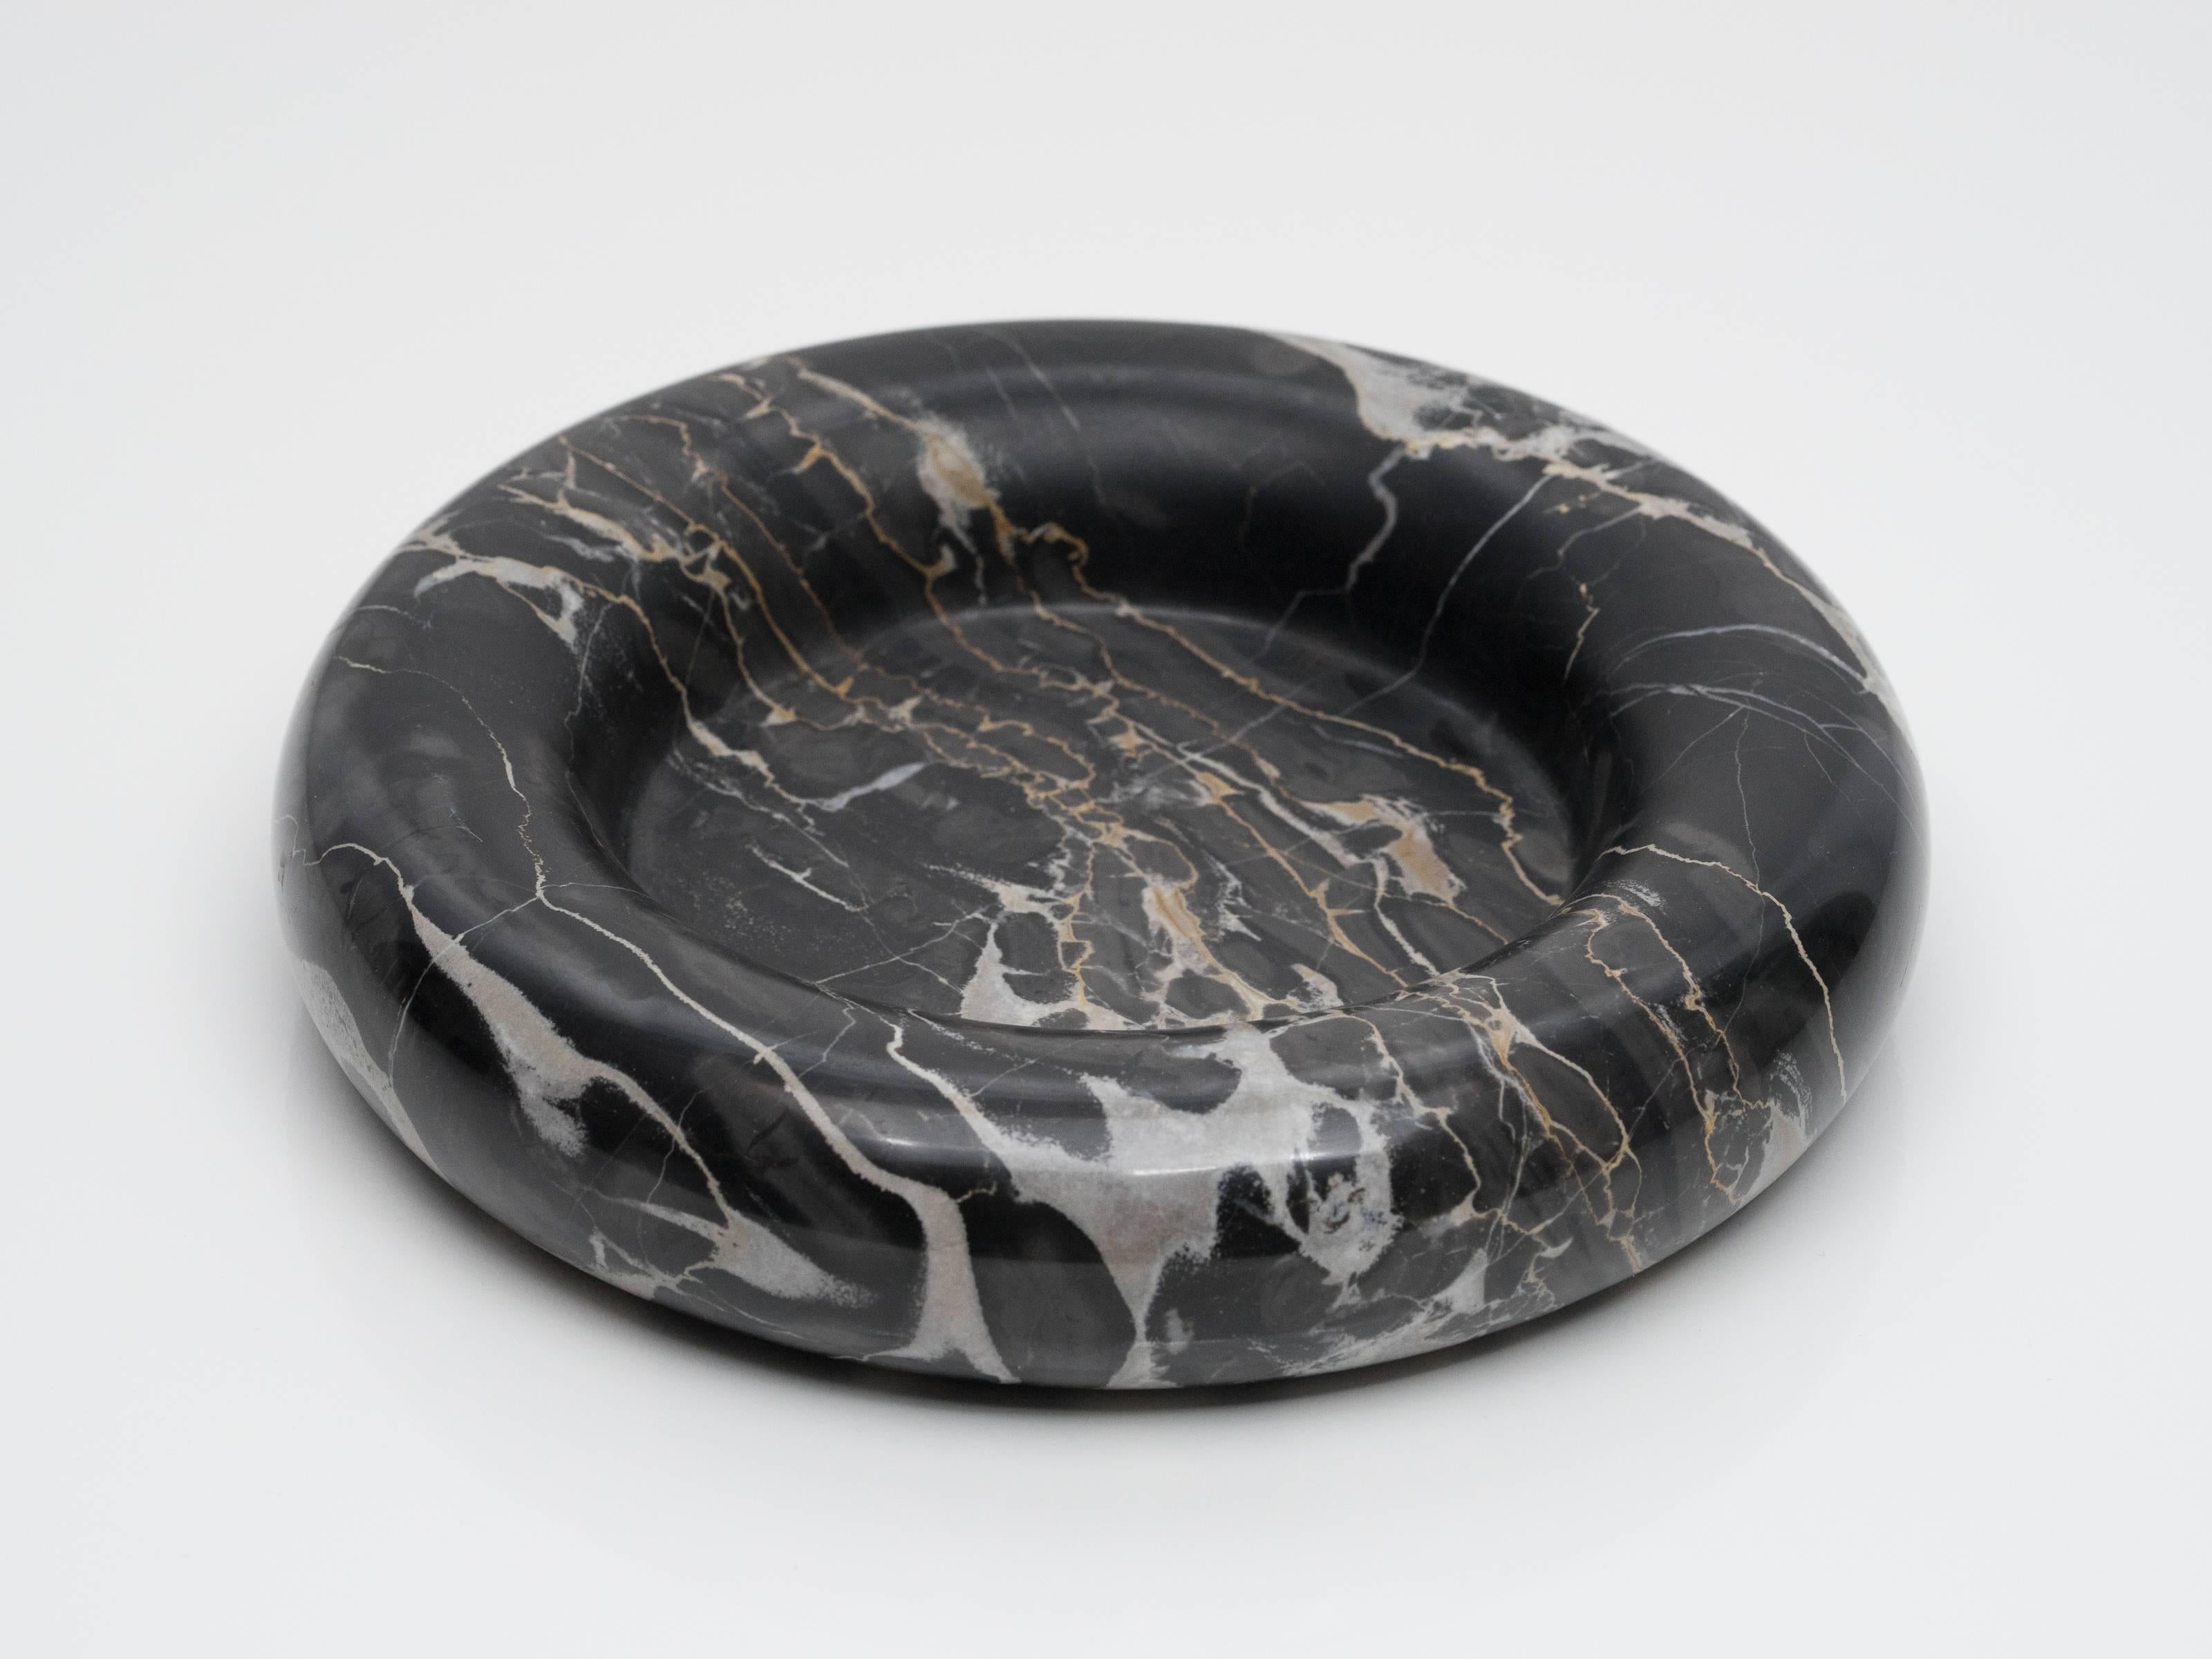 Designed as part of Up & Up’s initial collection of marble objects by some of the most respected designers of the 1970s. Made from black marble with light grey and gold veining. Flat centre surrounded by thick rounded edges, red felt on underside.